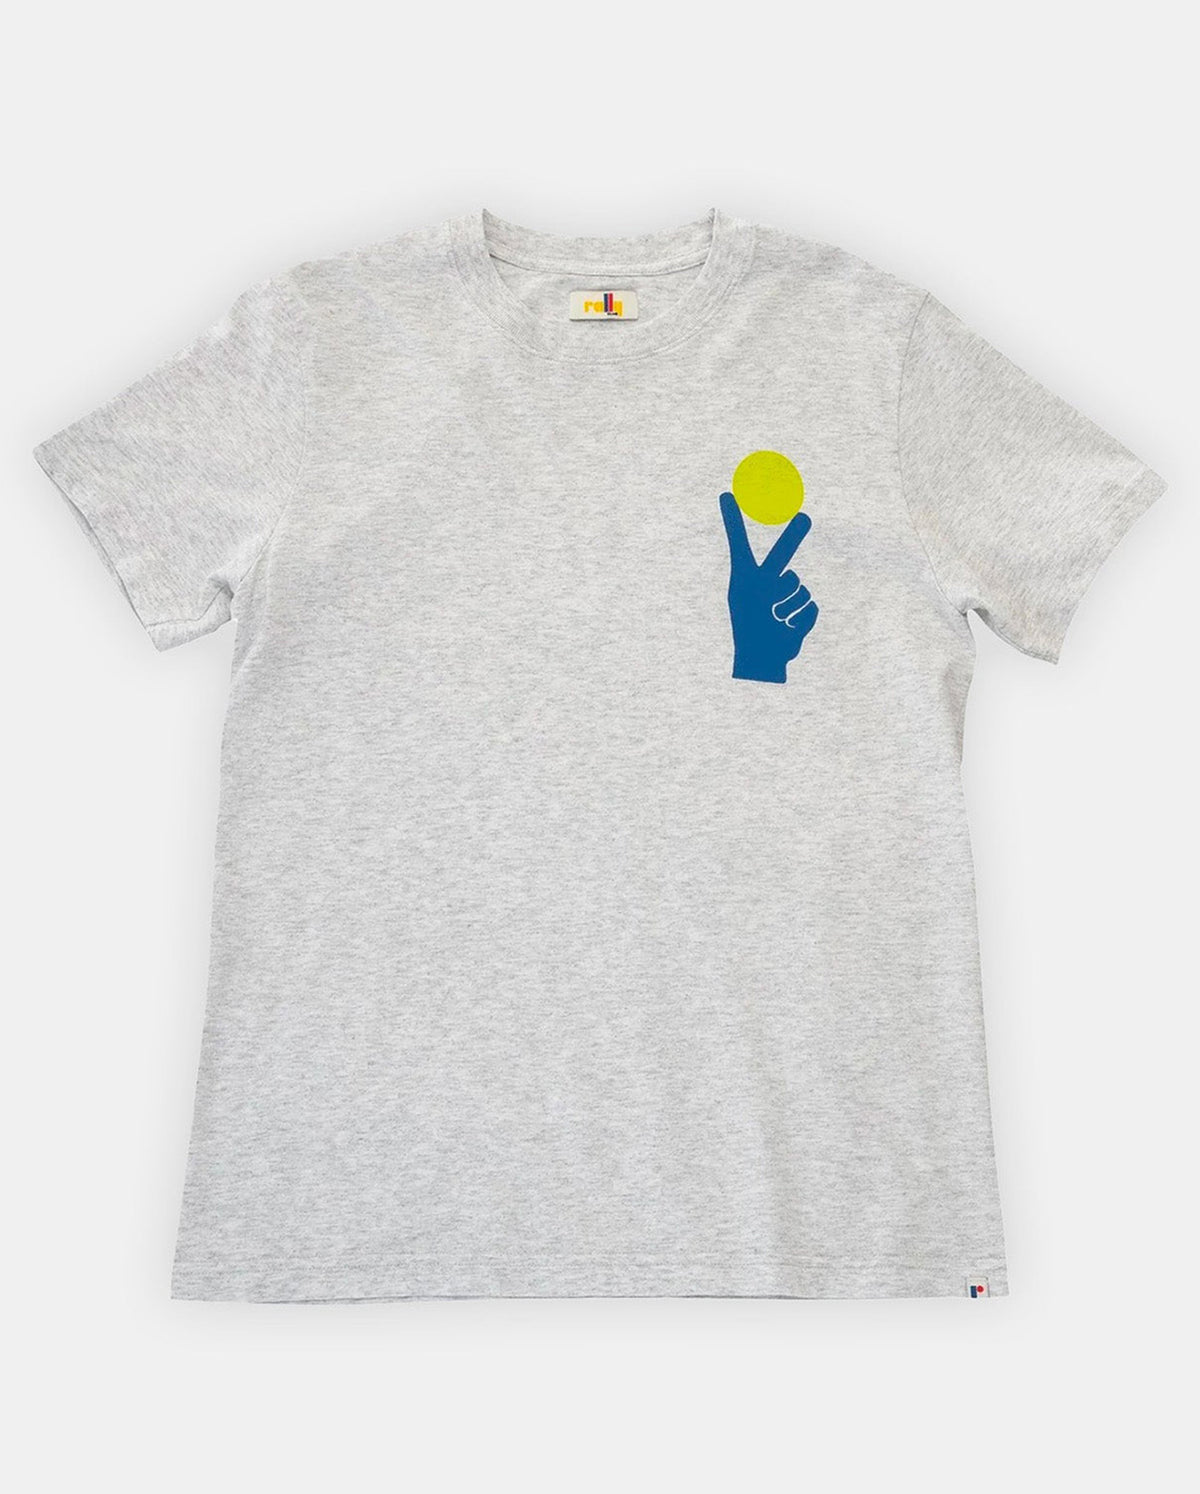 Anderson T Shirt In Grey